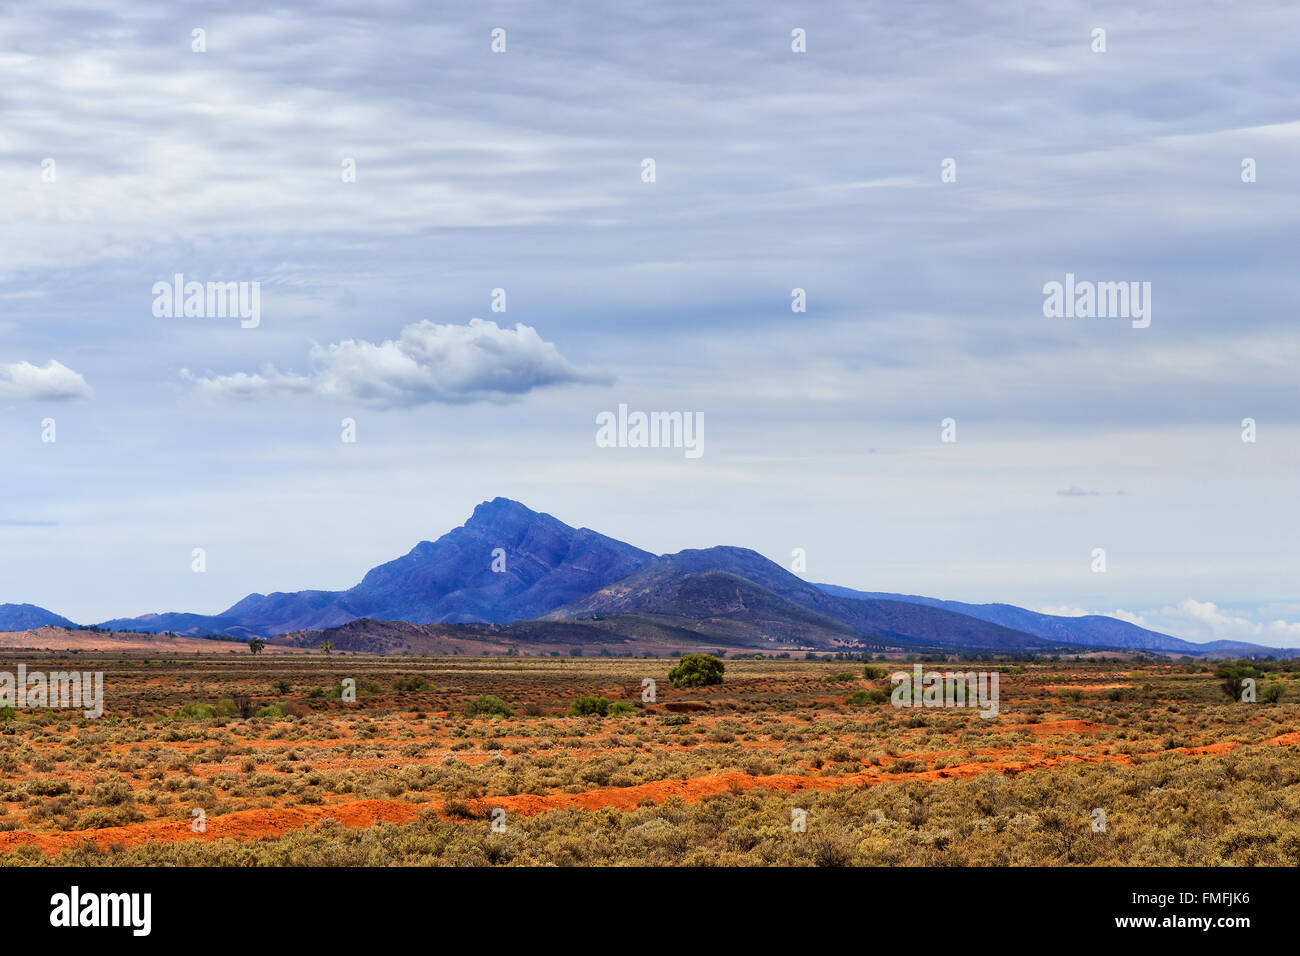 Lonely rocky mount of Wilpena Pound Flinders Ranges national park as seen across red soil outback plain in South Australia. Stock Photo